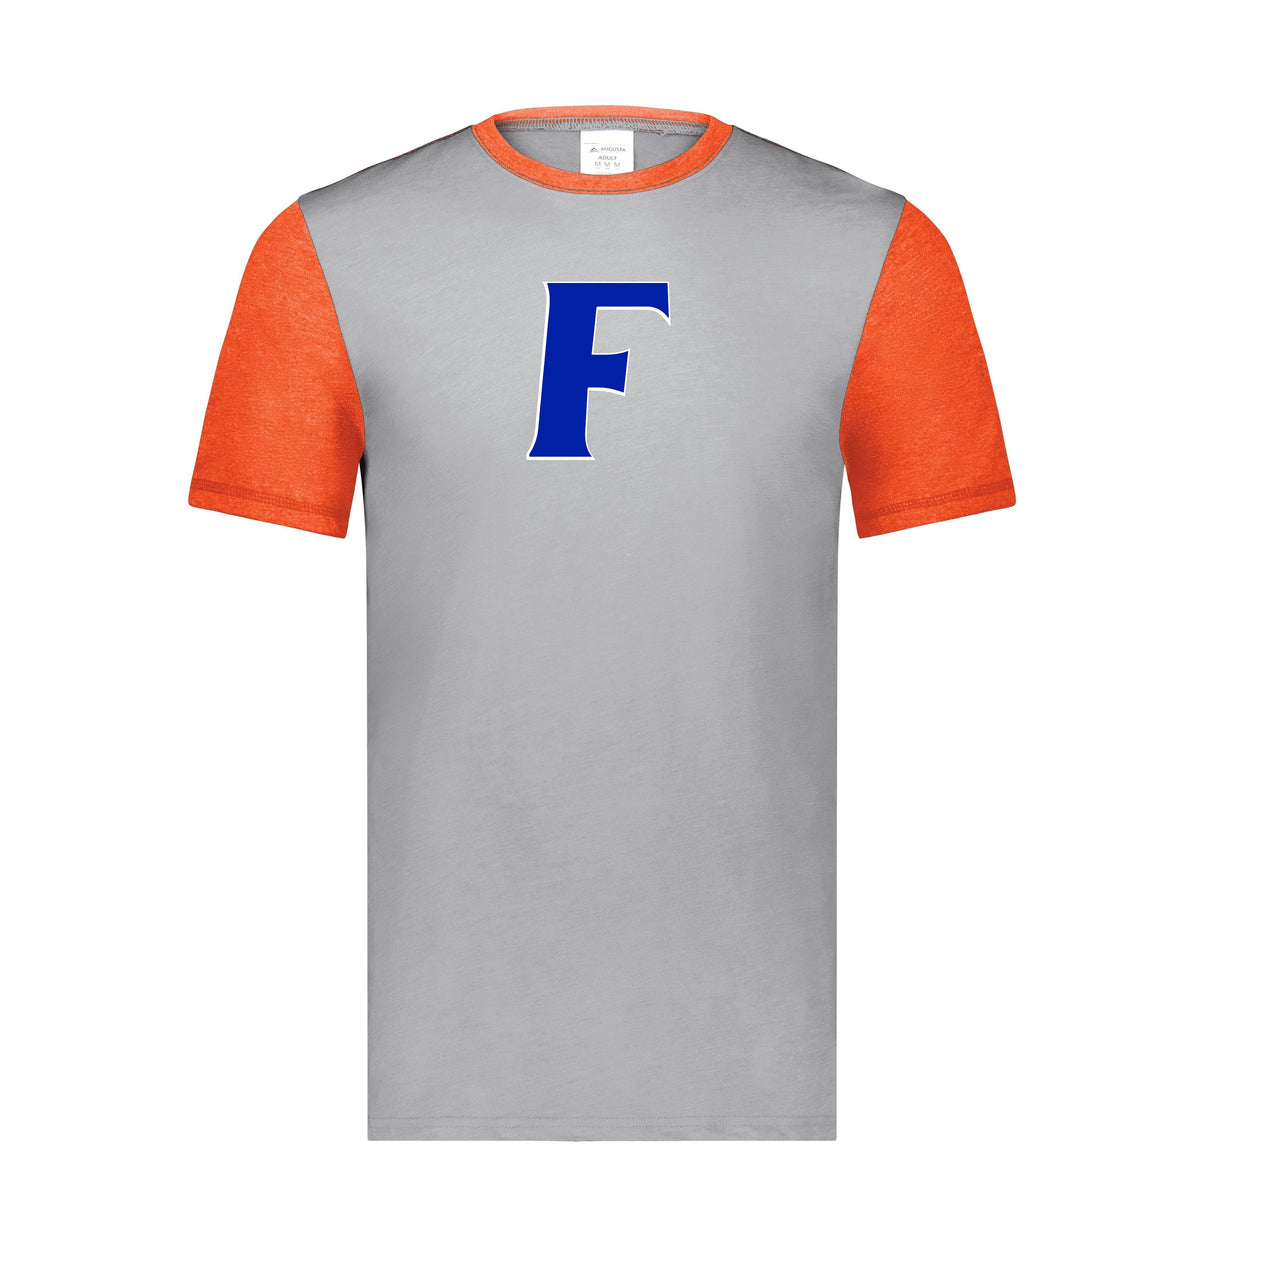 Youth - Gameday Vintage Ringer Tee - (Force Softball)